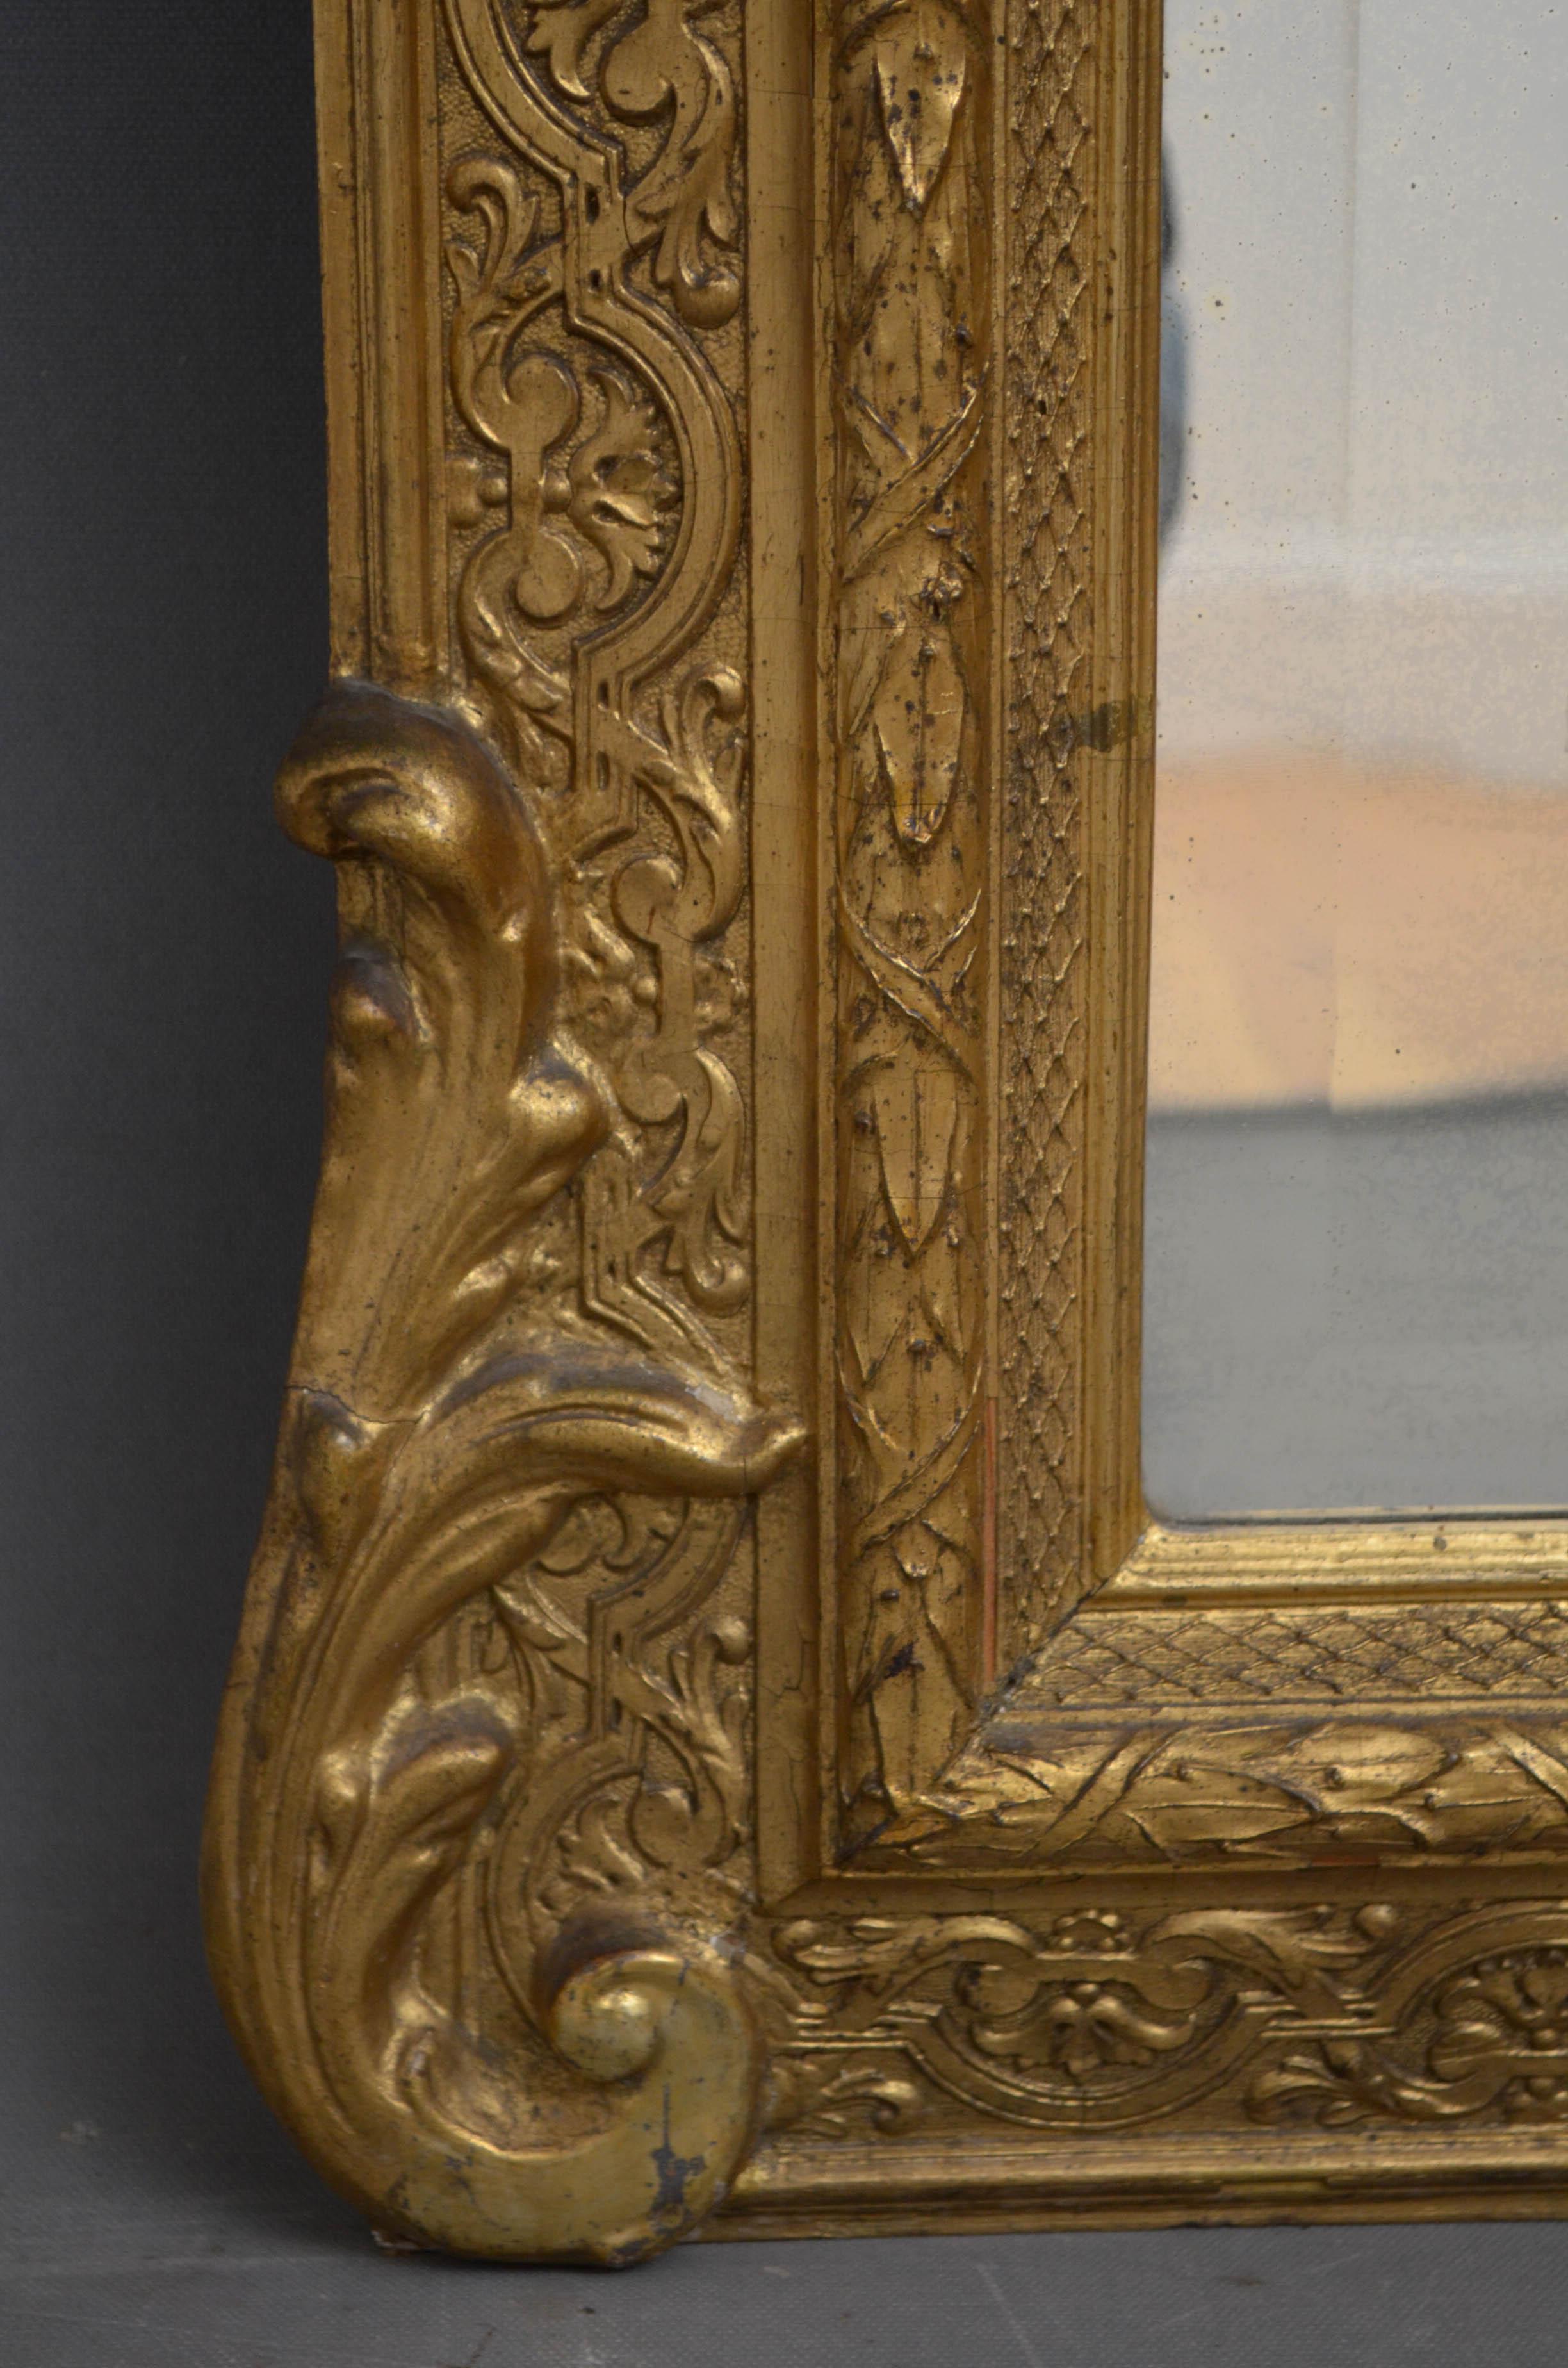 Sn4589 Victorian gilded wall mirror, having original bevelled edge glass with some foxing in finely carved frame. This antique mirror retains its original glass, gilt and backboard, circa 1870

Measures: H55? W26.5? d5?

H140cm W67cm